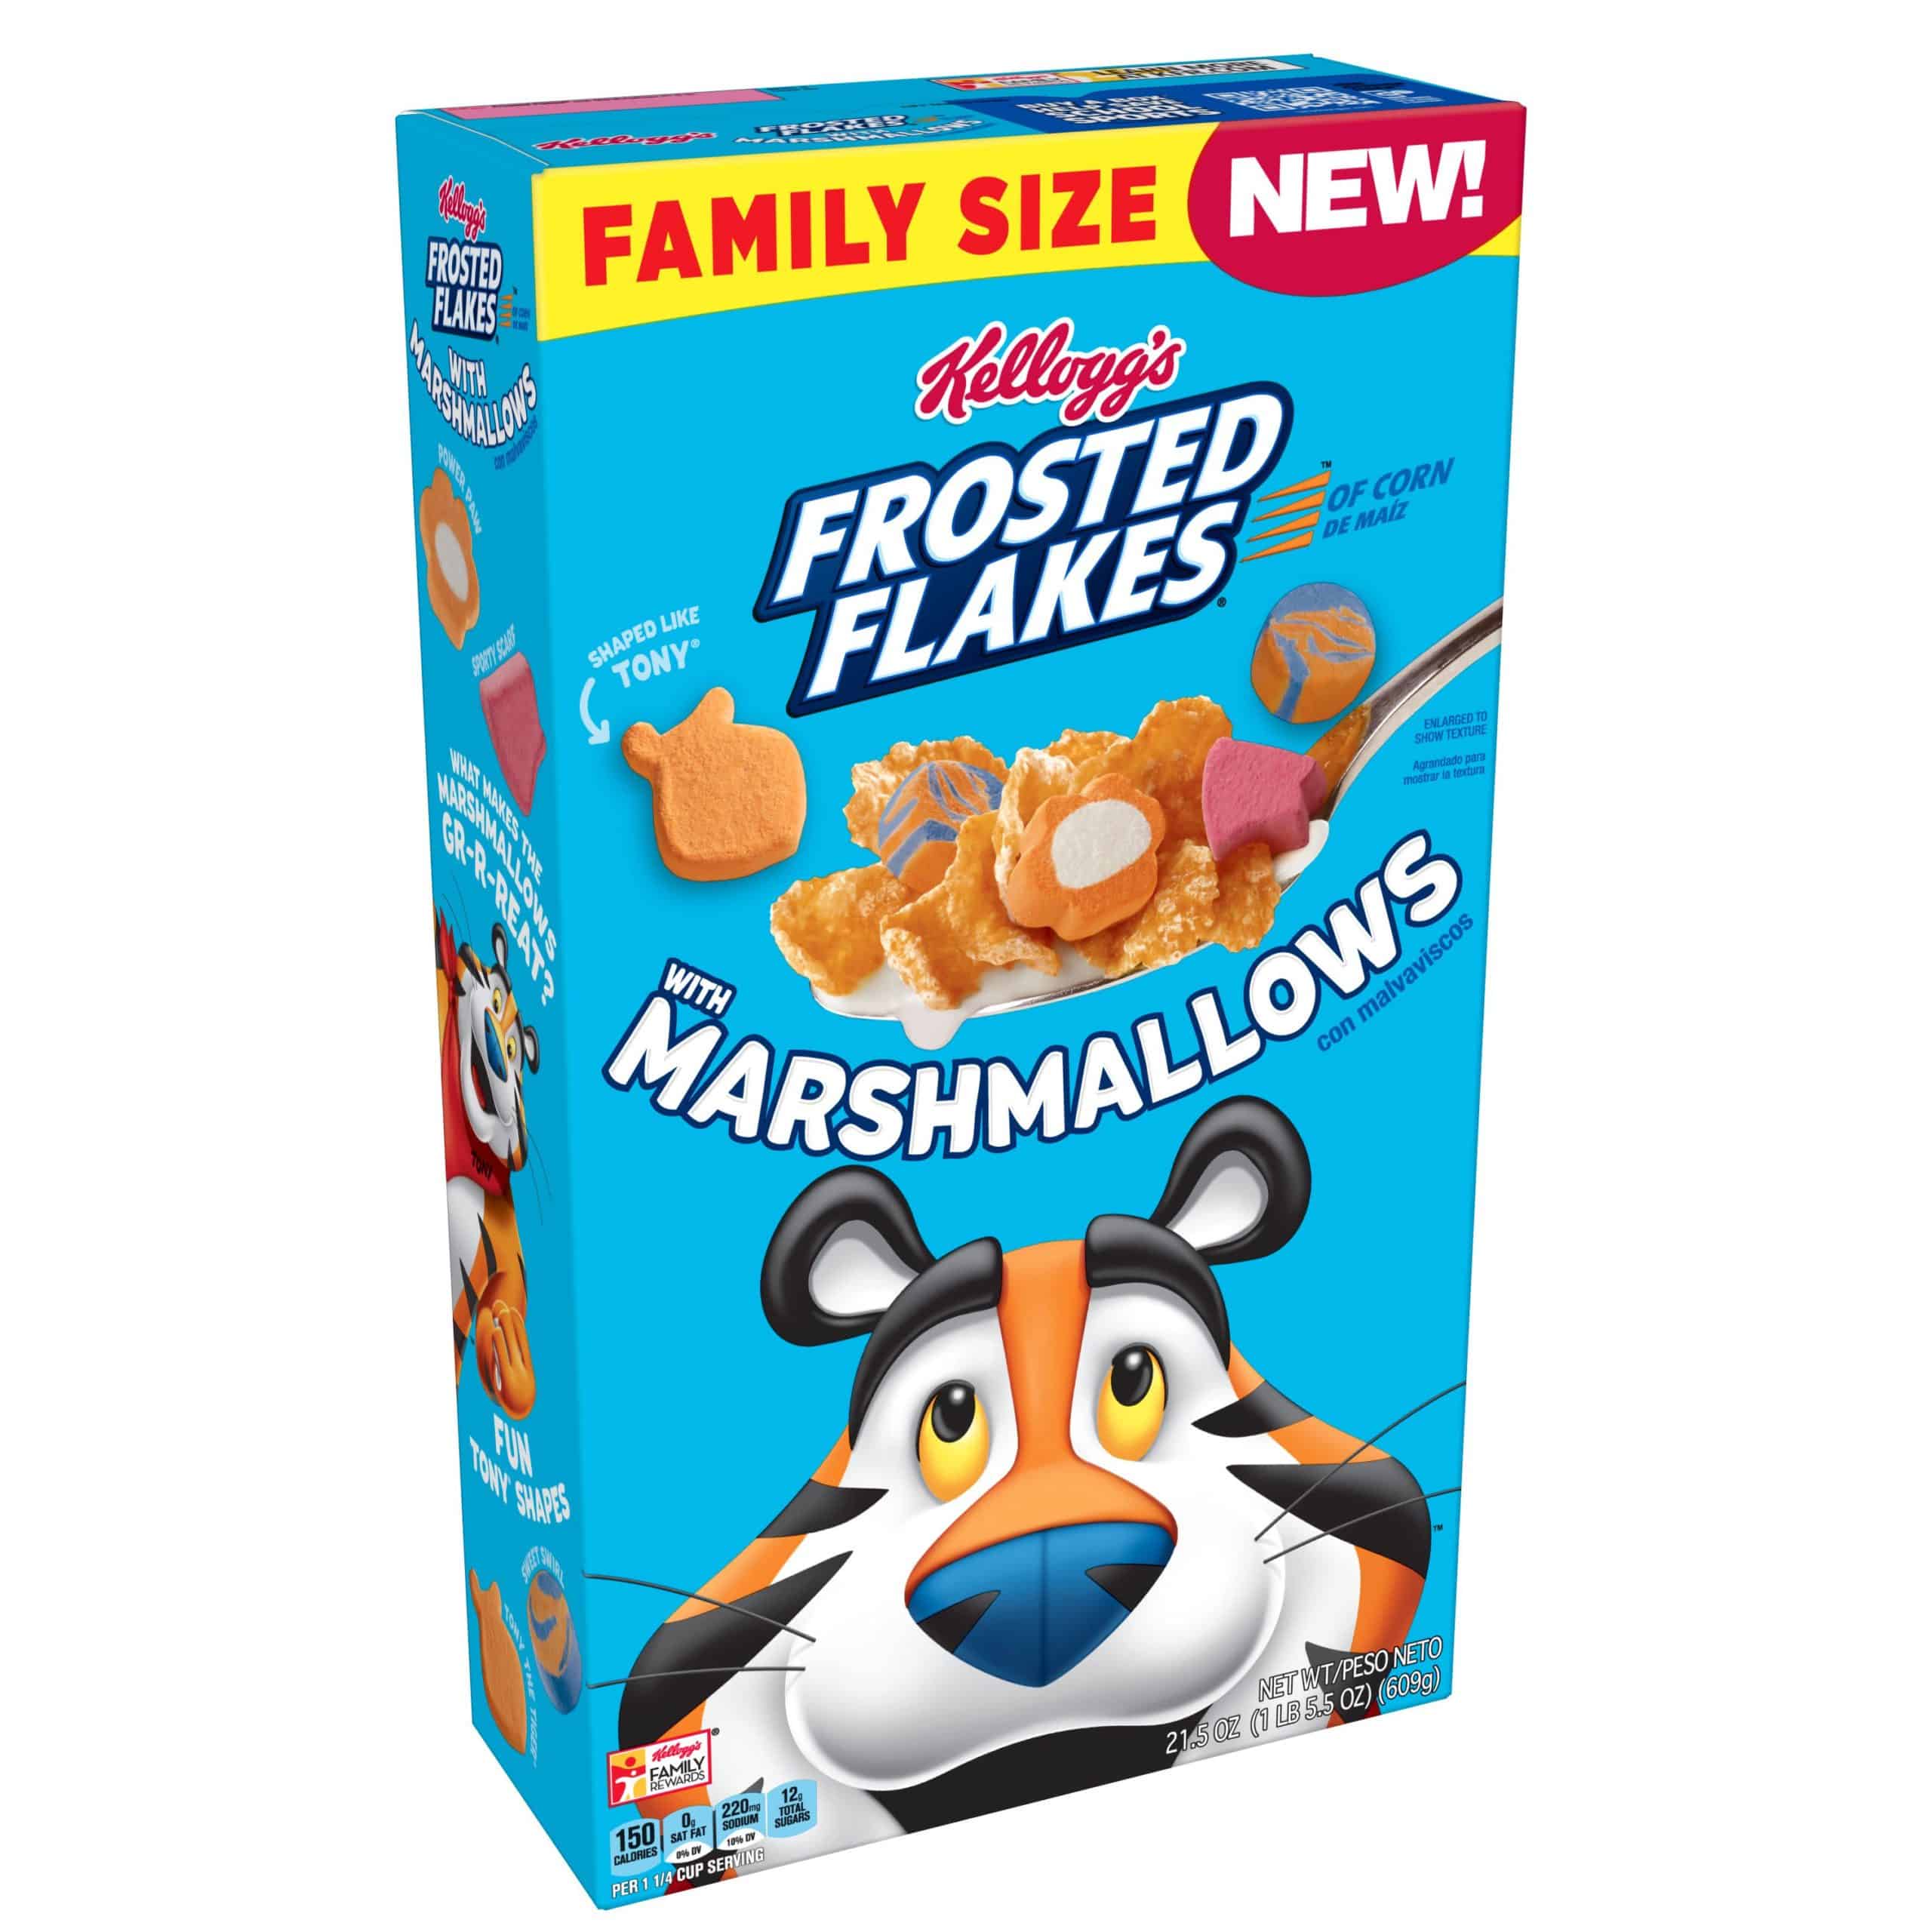 Kellogg's Frosted Flakes, With Marshmallows, Family Size, 12 Oz